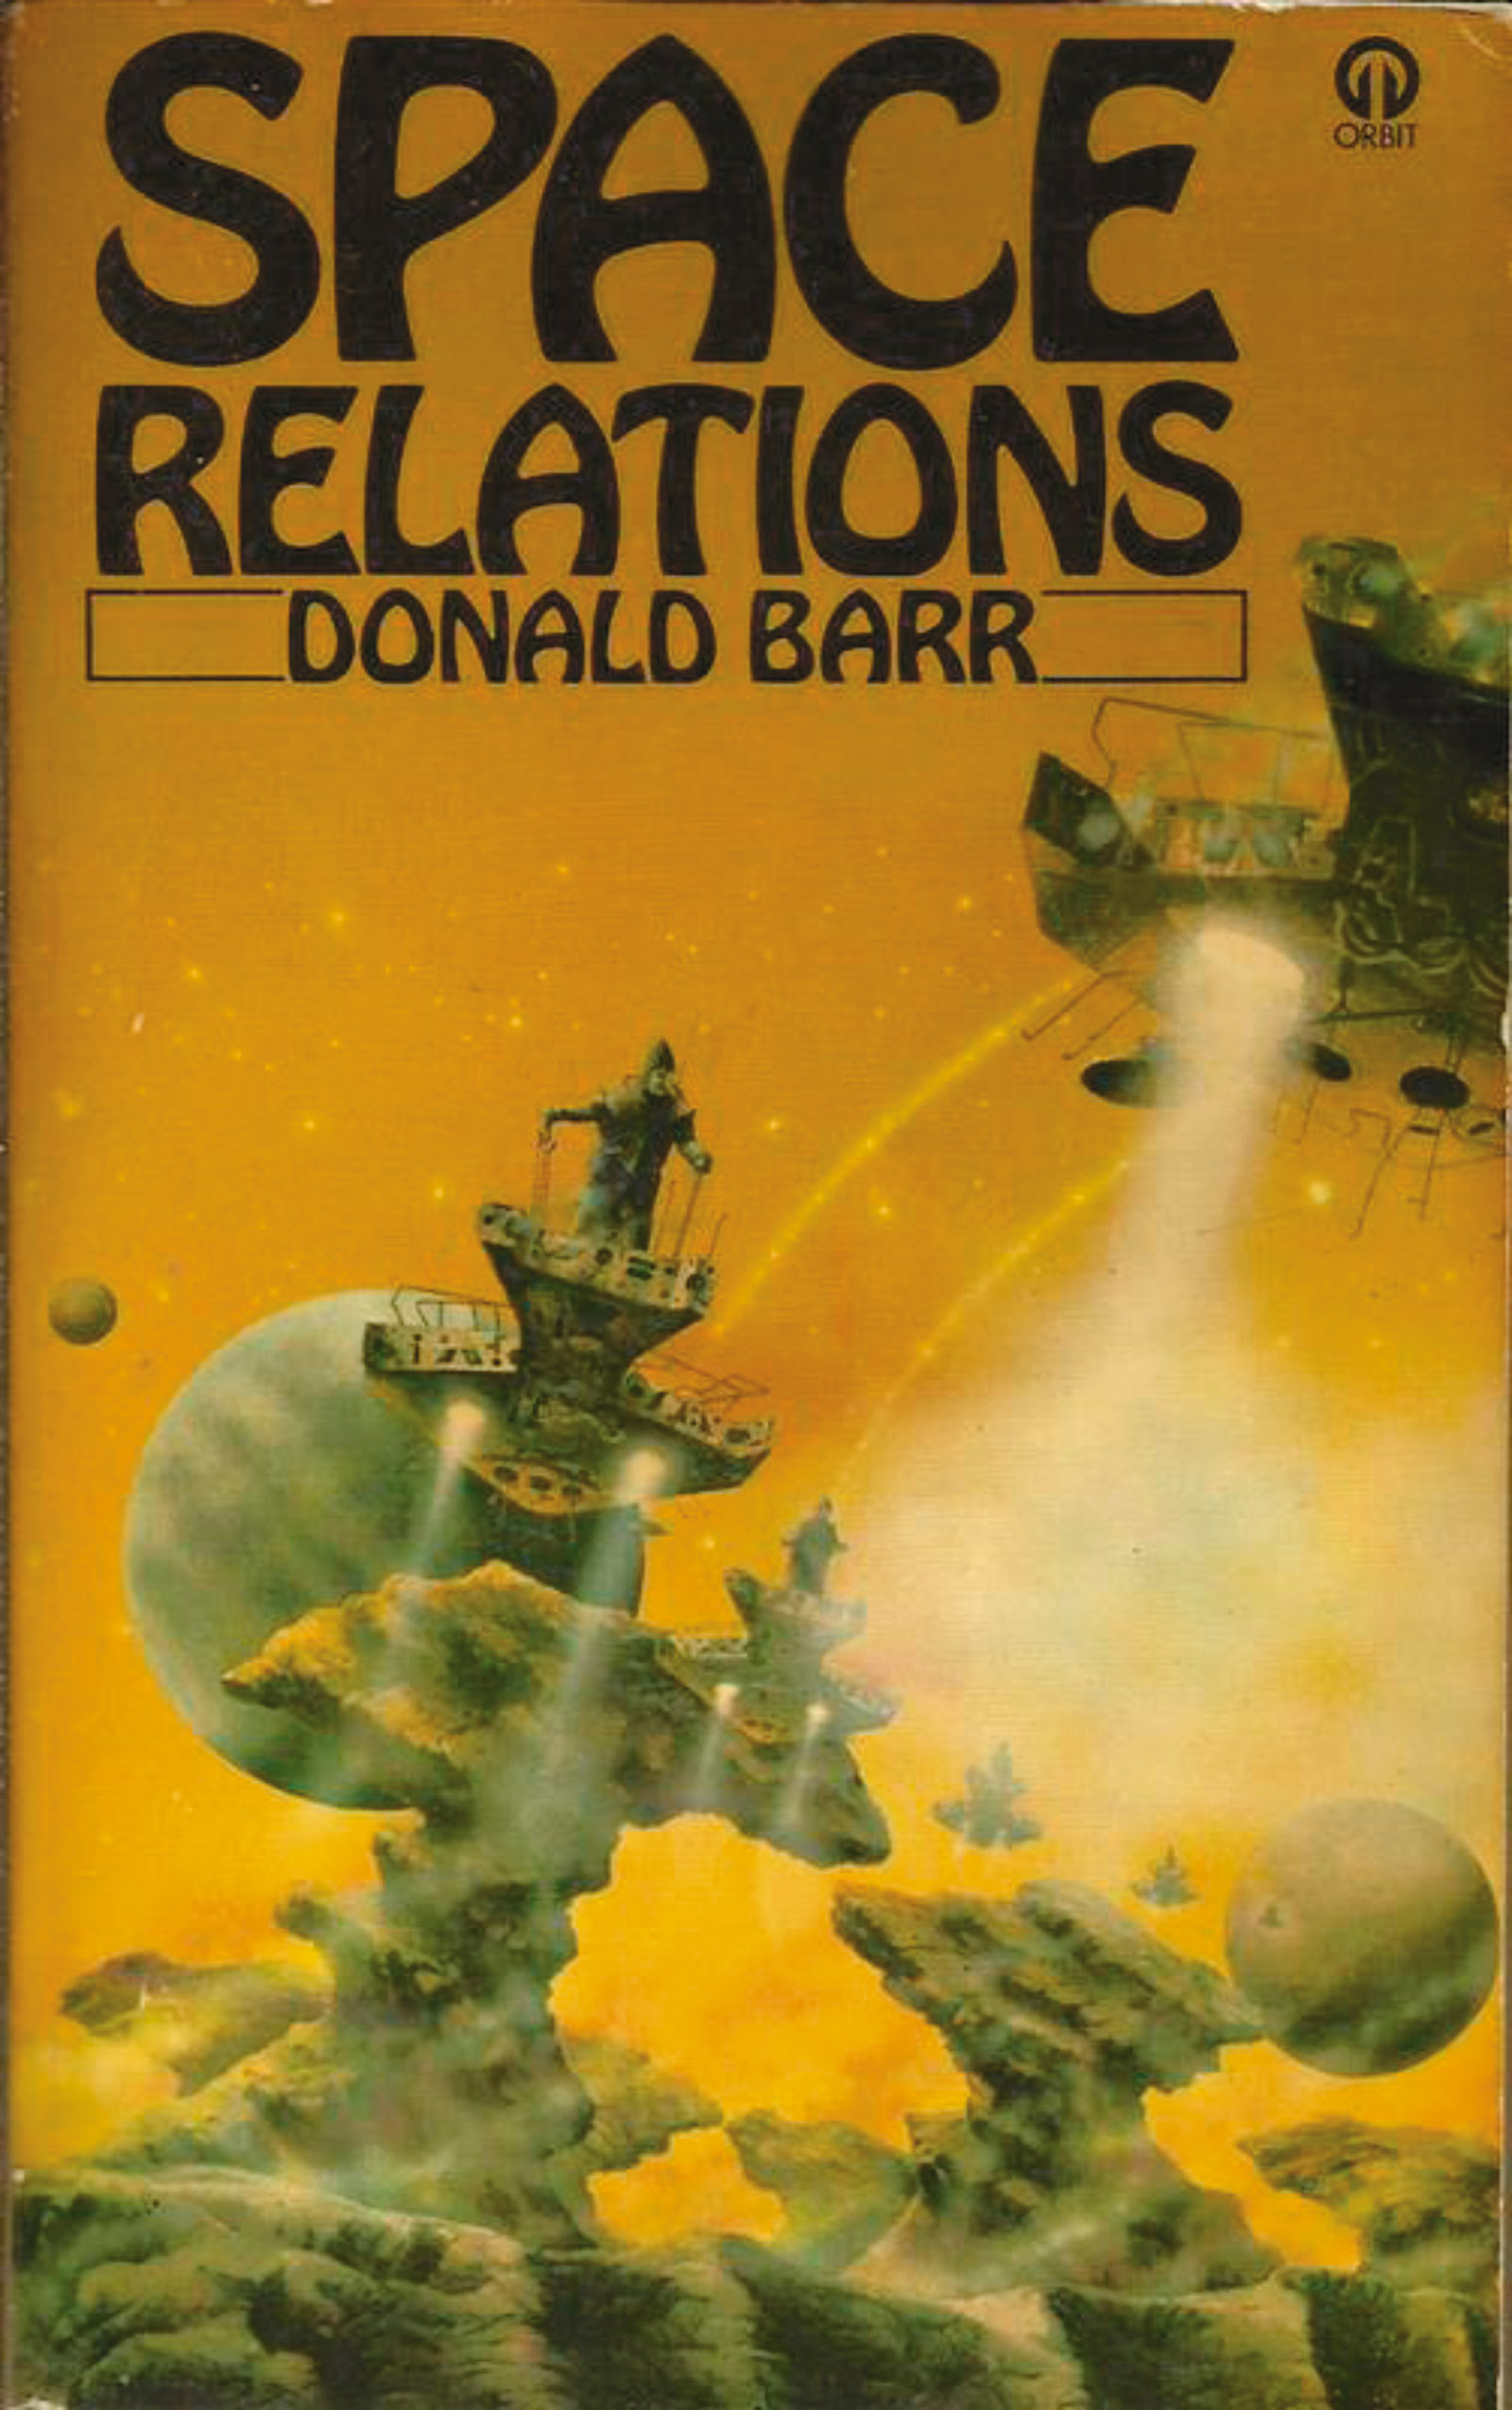 The British cover of Donald Barr’s 1973 novel Space Relations